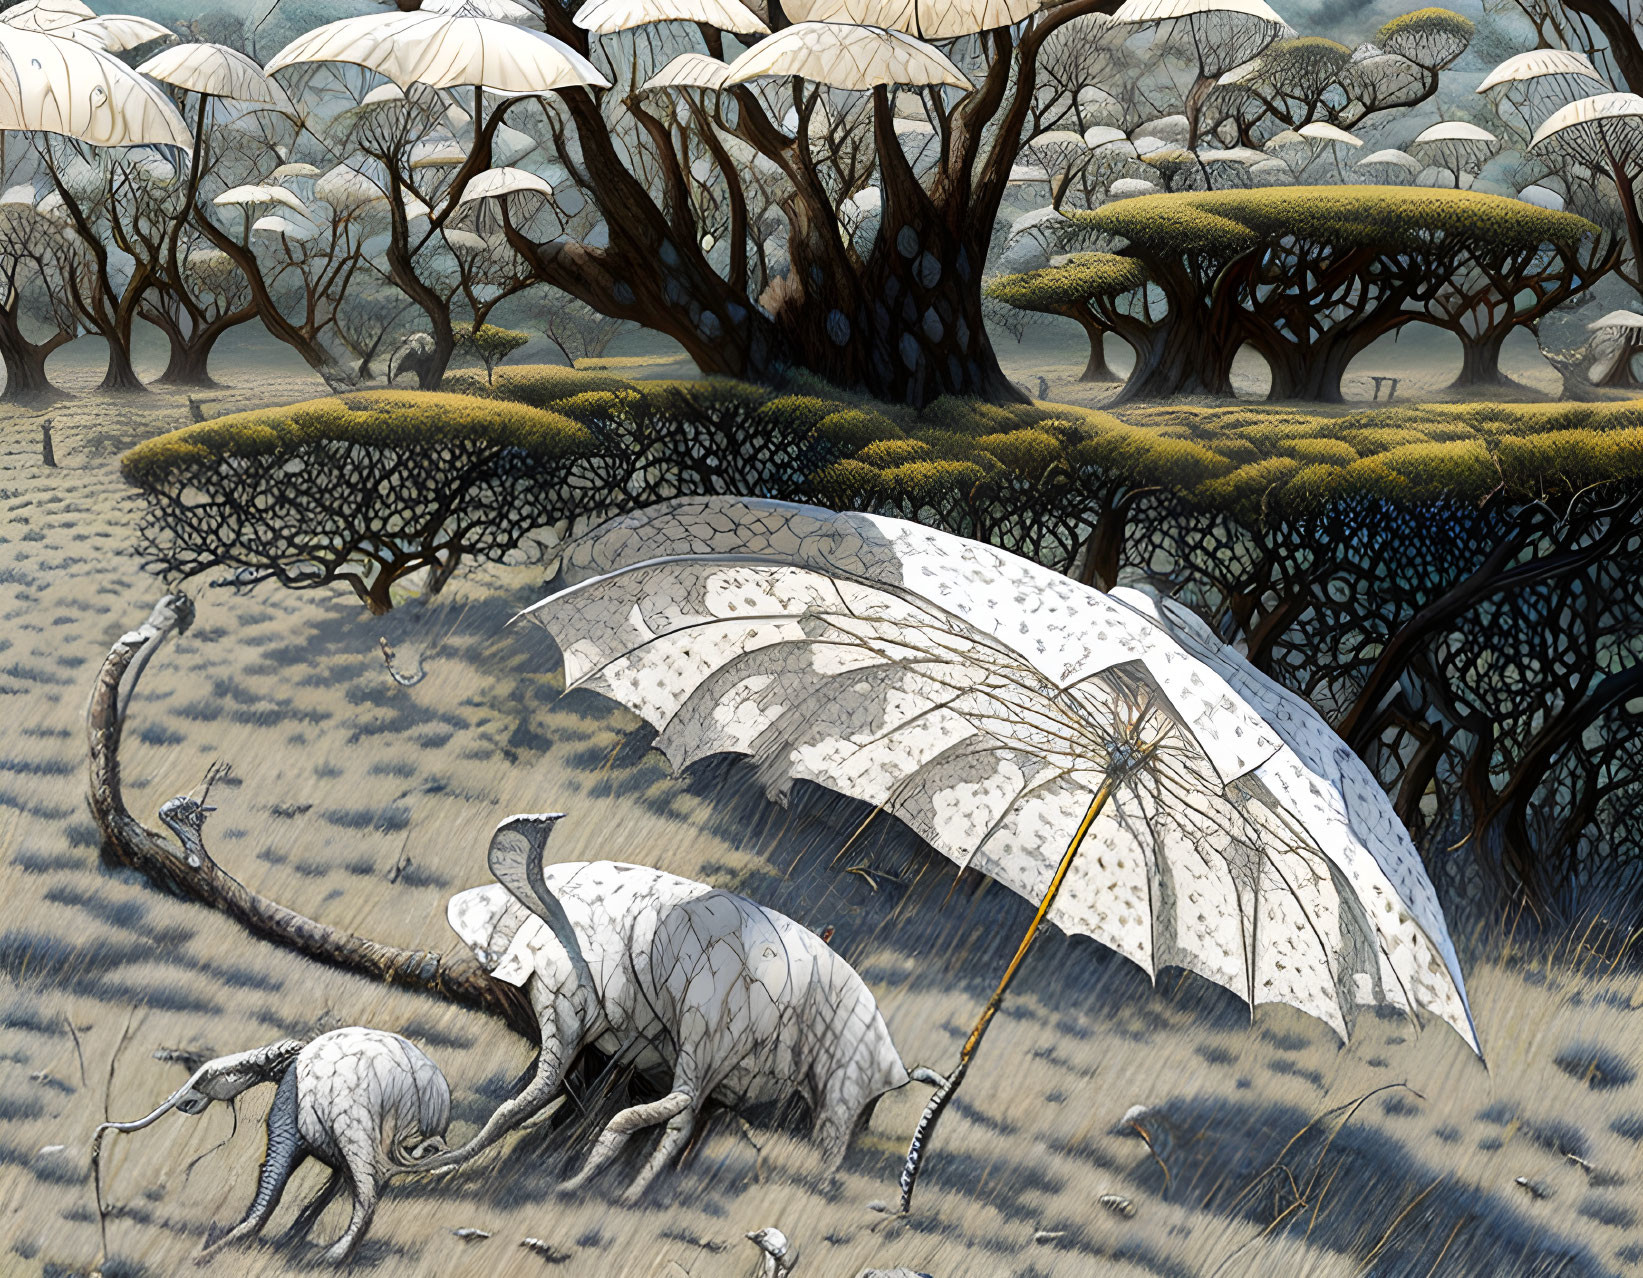 Fantasy landscape with umbrella-shaped trees and shell-covered creatures